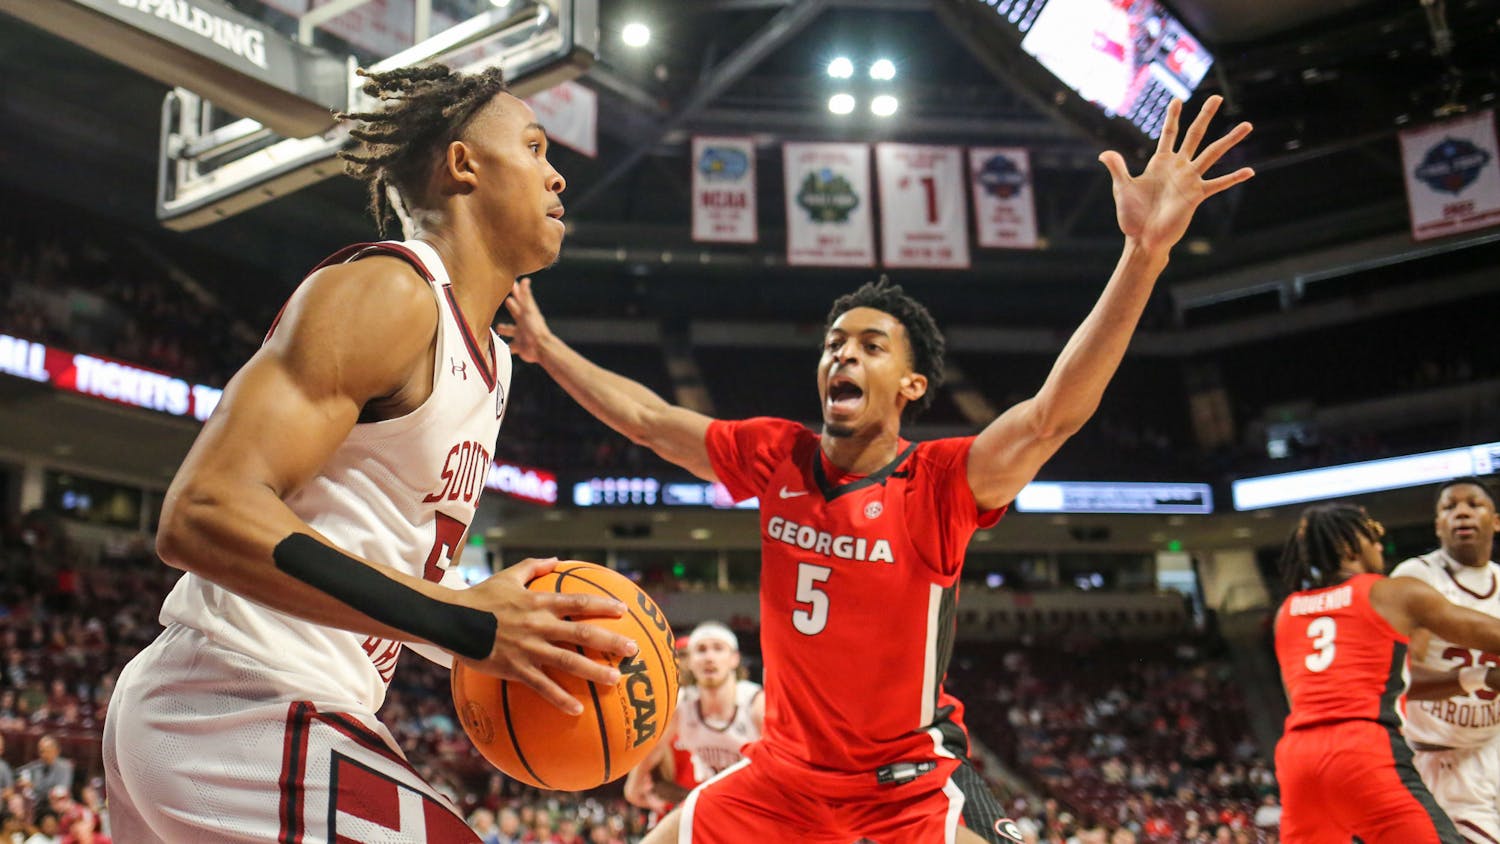 The Gamecock men's basketball team ended its regular season by defeating the Georgia Bulldogs 61-55 at Colonial Life Arena on March 4, 2023. South Carolina is 11-20 overall heading into SEC Tournament play next week in Nashville, Tennessee.